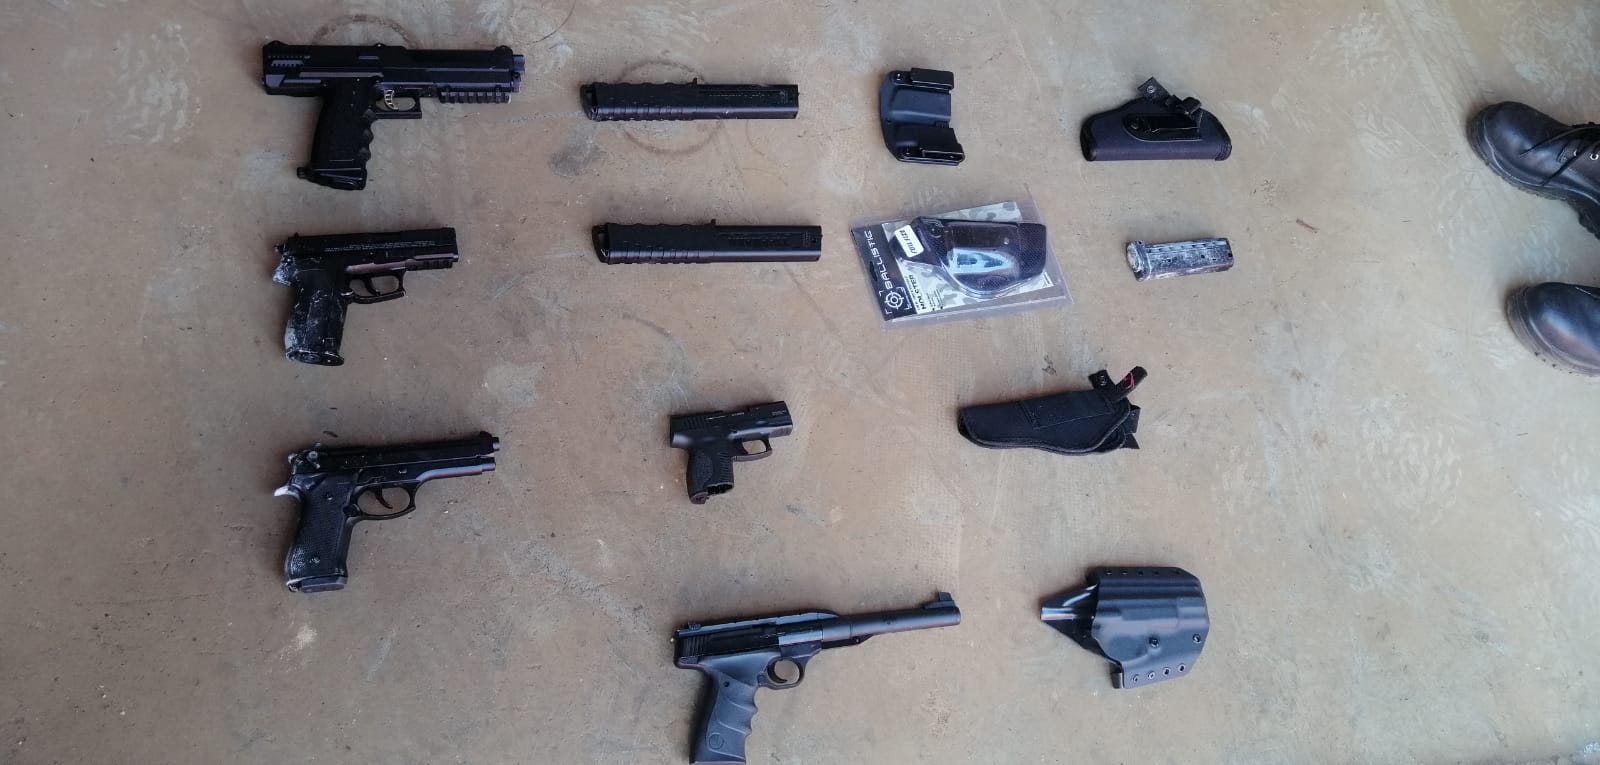 Police arrest a man believed to be behind the random shooting at Doornpoort tollgate plaza in December 2020, and find in the suspect's possession nine unlicensed firearms and ammunition